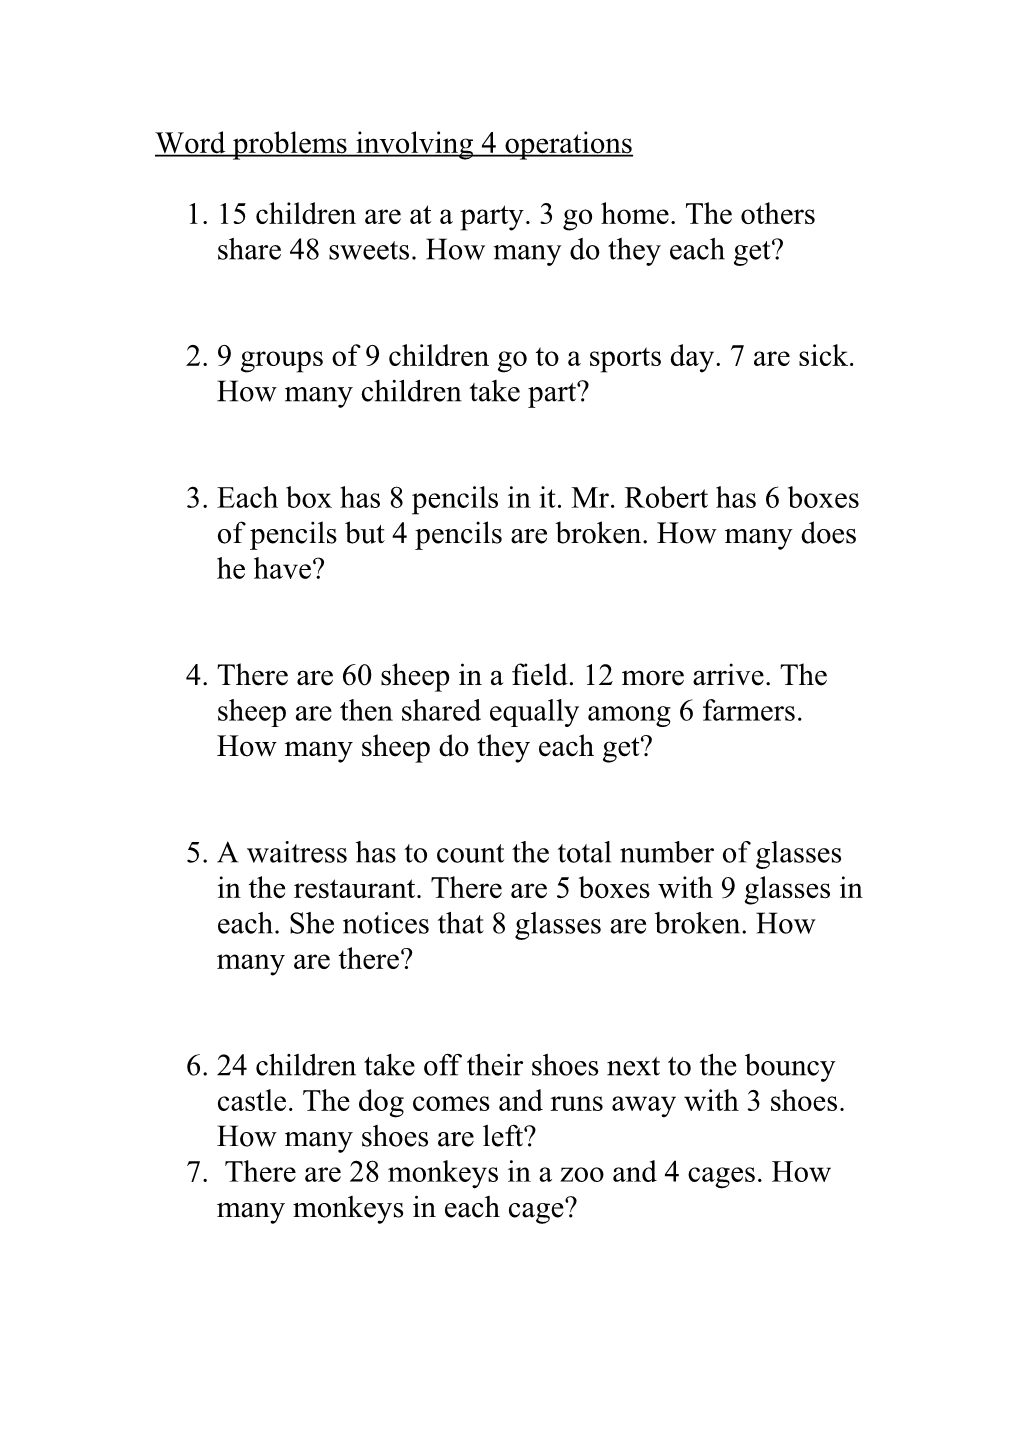 Word Problems Involving Multiplication and Division